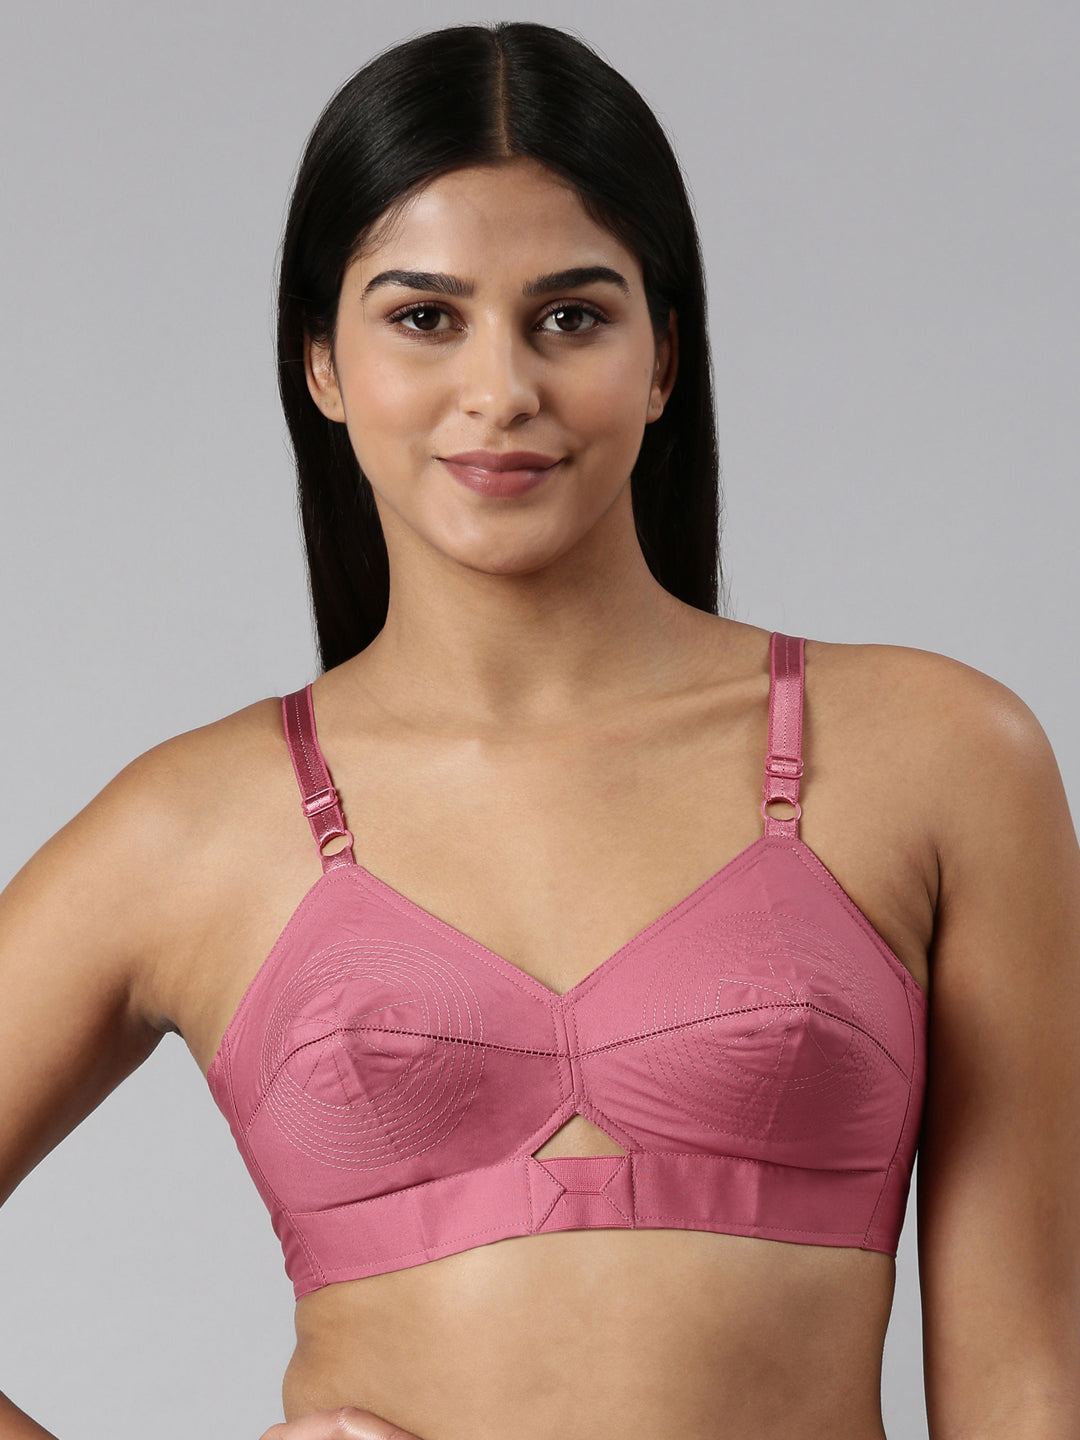 blossom-authentic bra-B Cup-rose gold1-Woven cotton-everyday bra